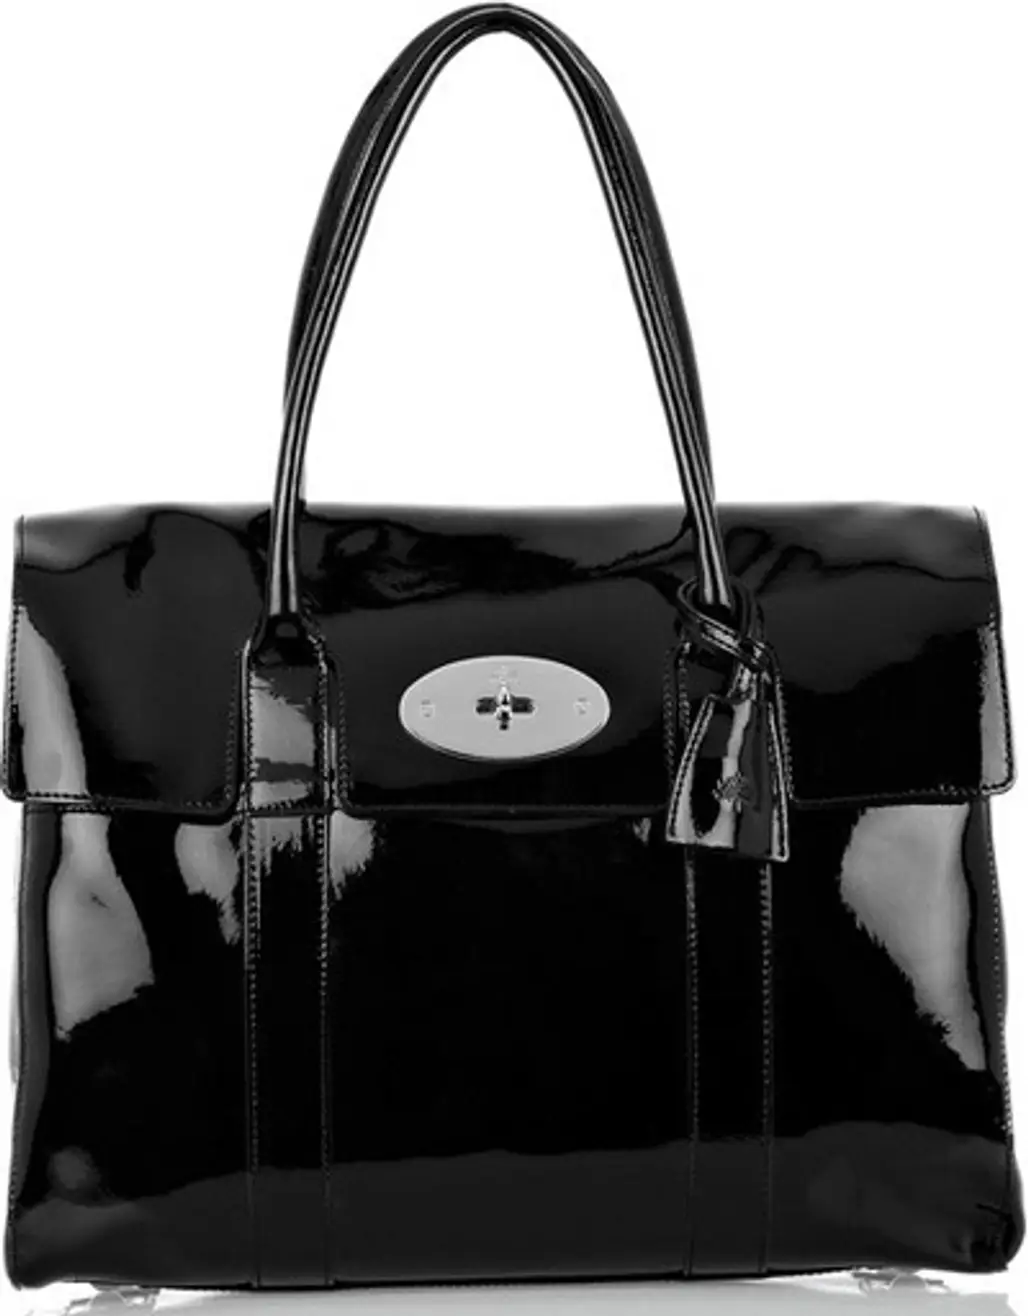 Mulberry Bayswater Patent Leather Laptop Bag